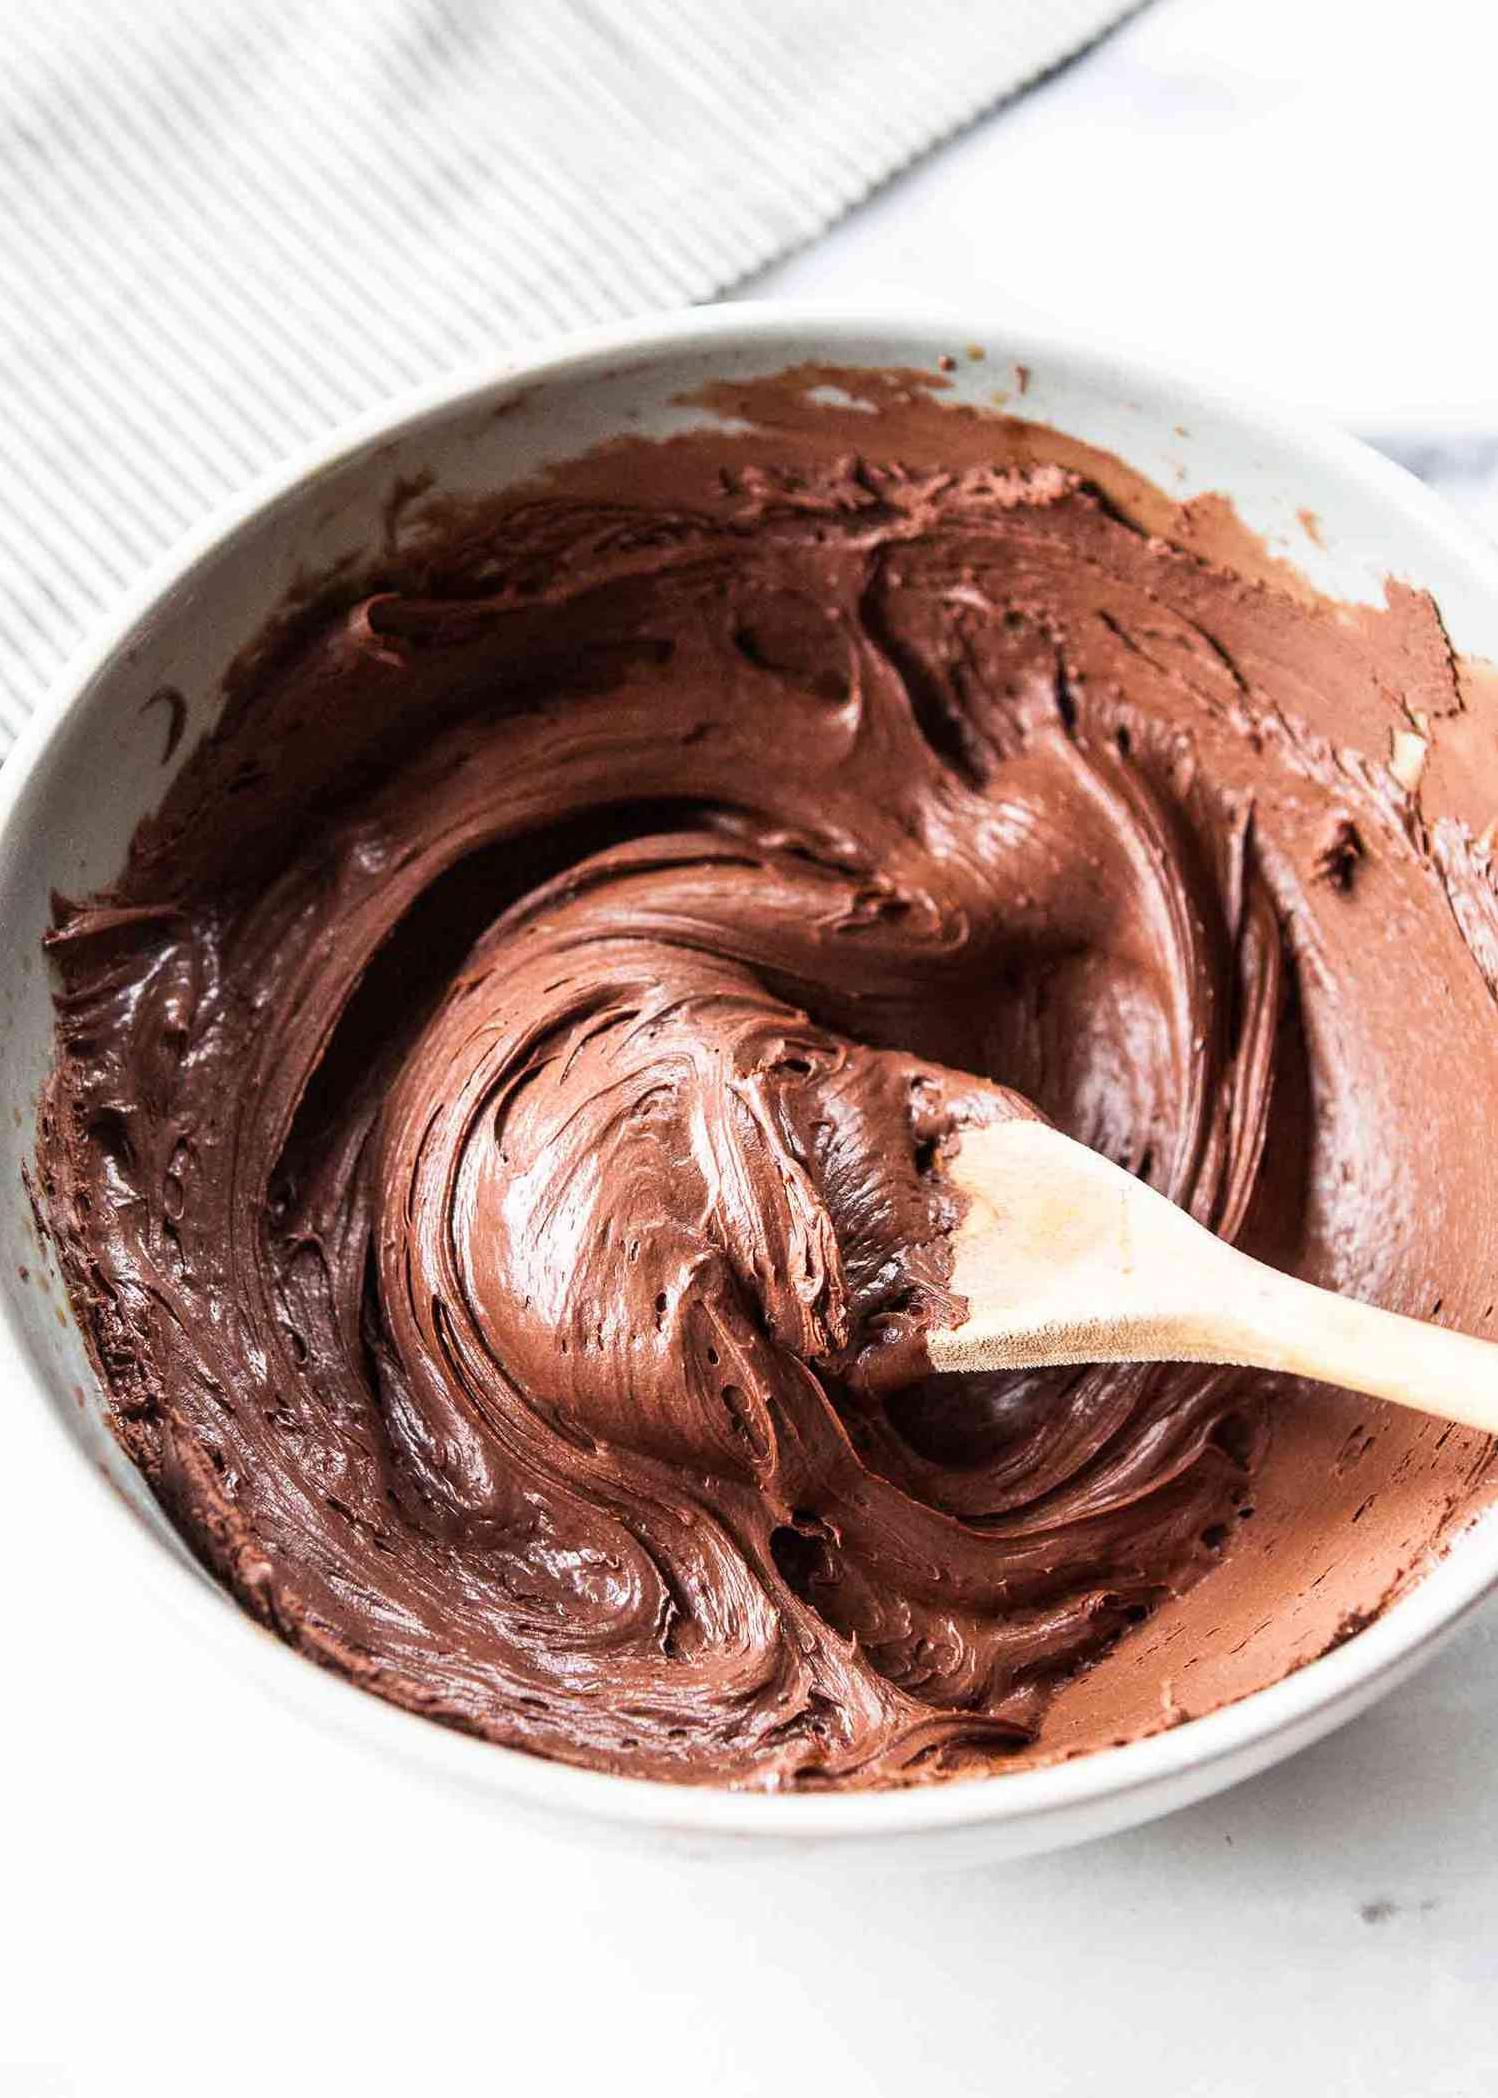  This vegan chocolate frosting is so easy to make, and it's equally delicious!